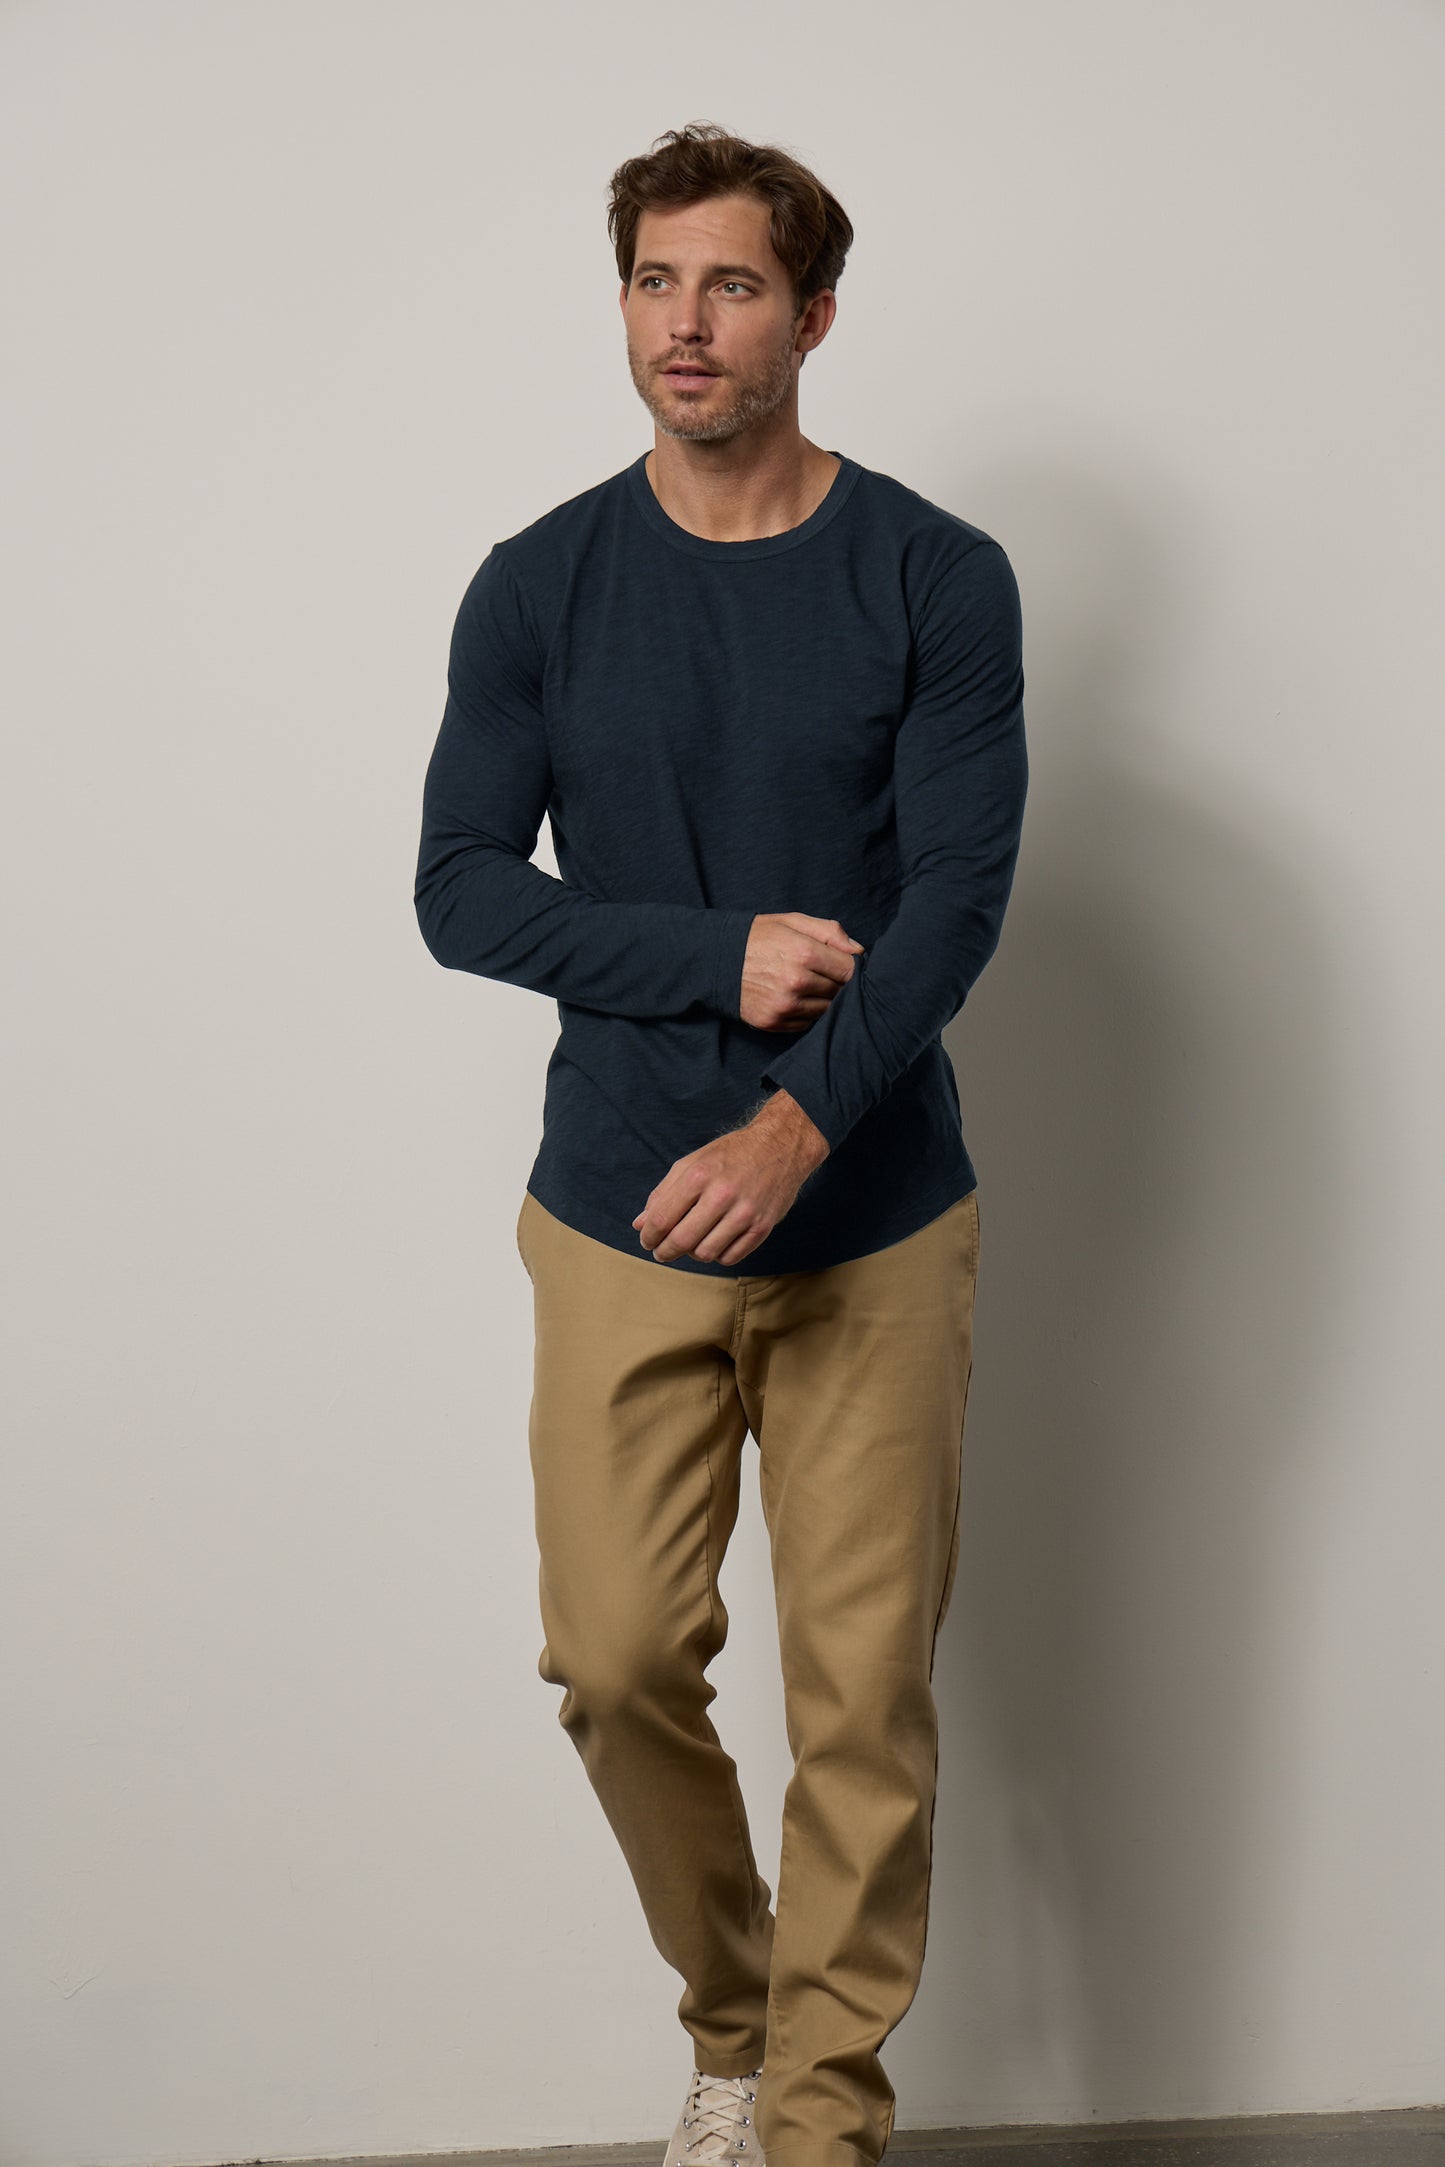 A man wearing a Velvet by Graham & Spencer KAI CREW NECK TEE in navy and khaki pants rocked a flawless fit.-35607579230401